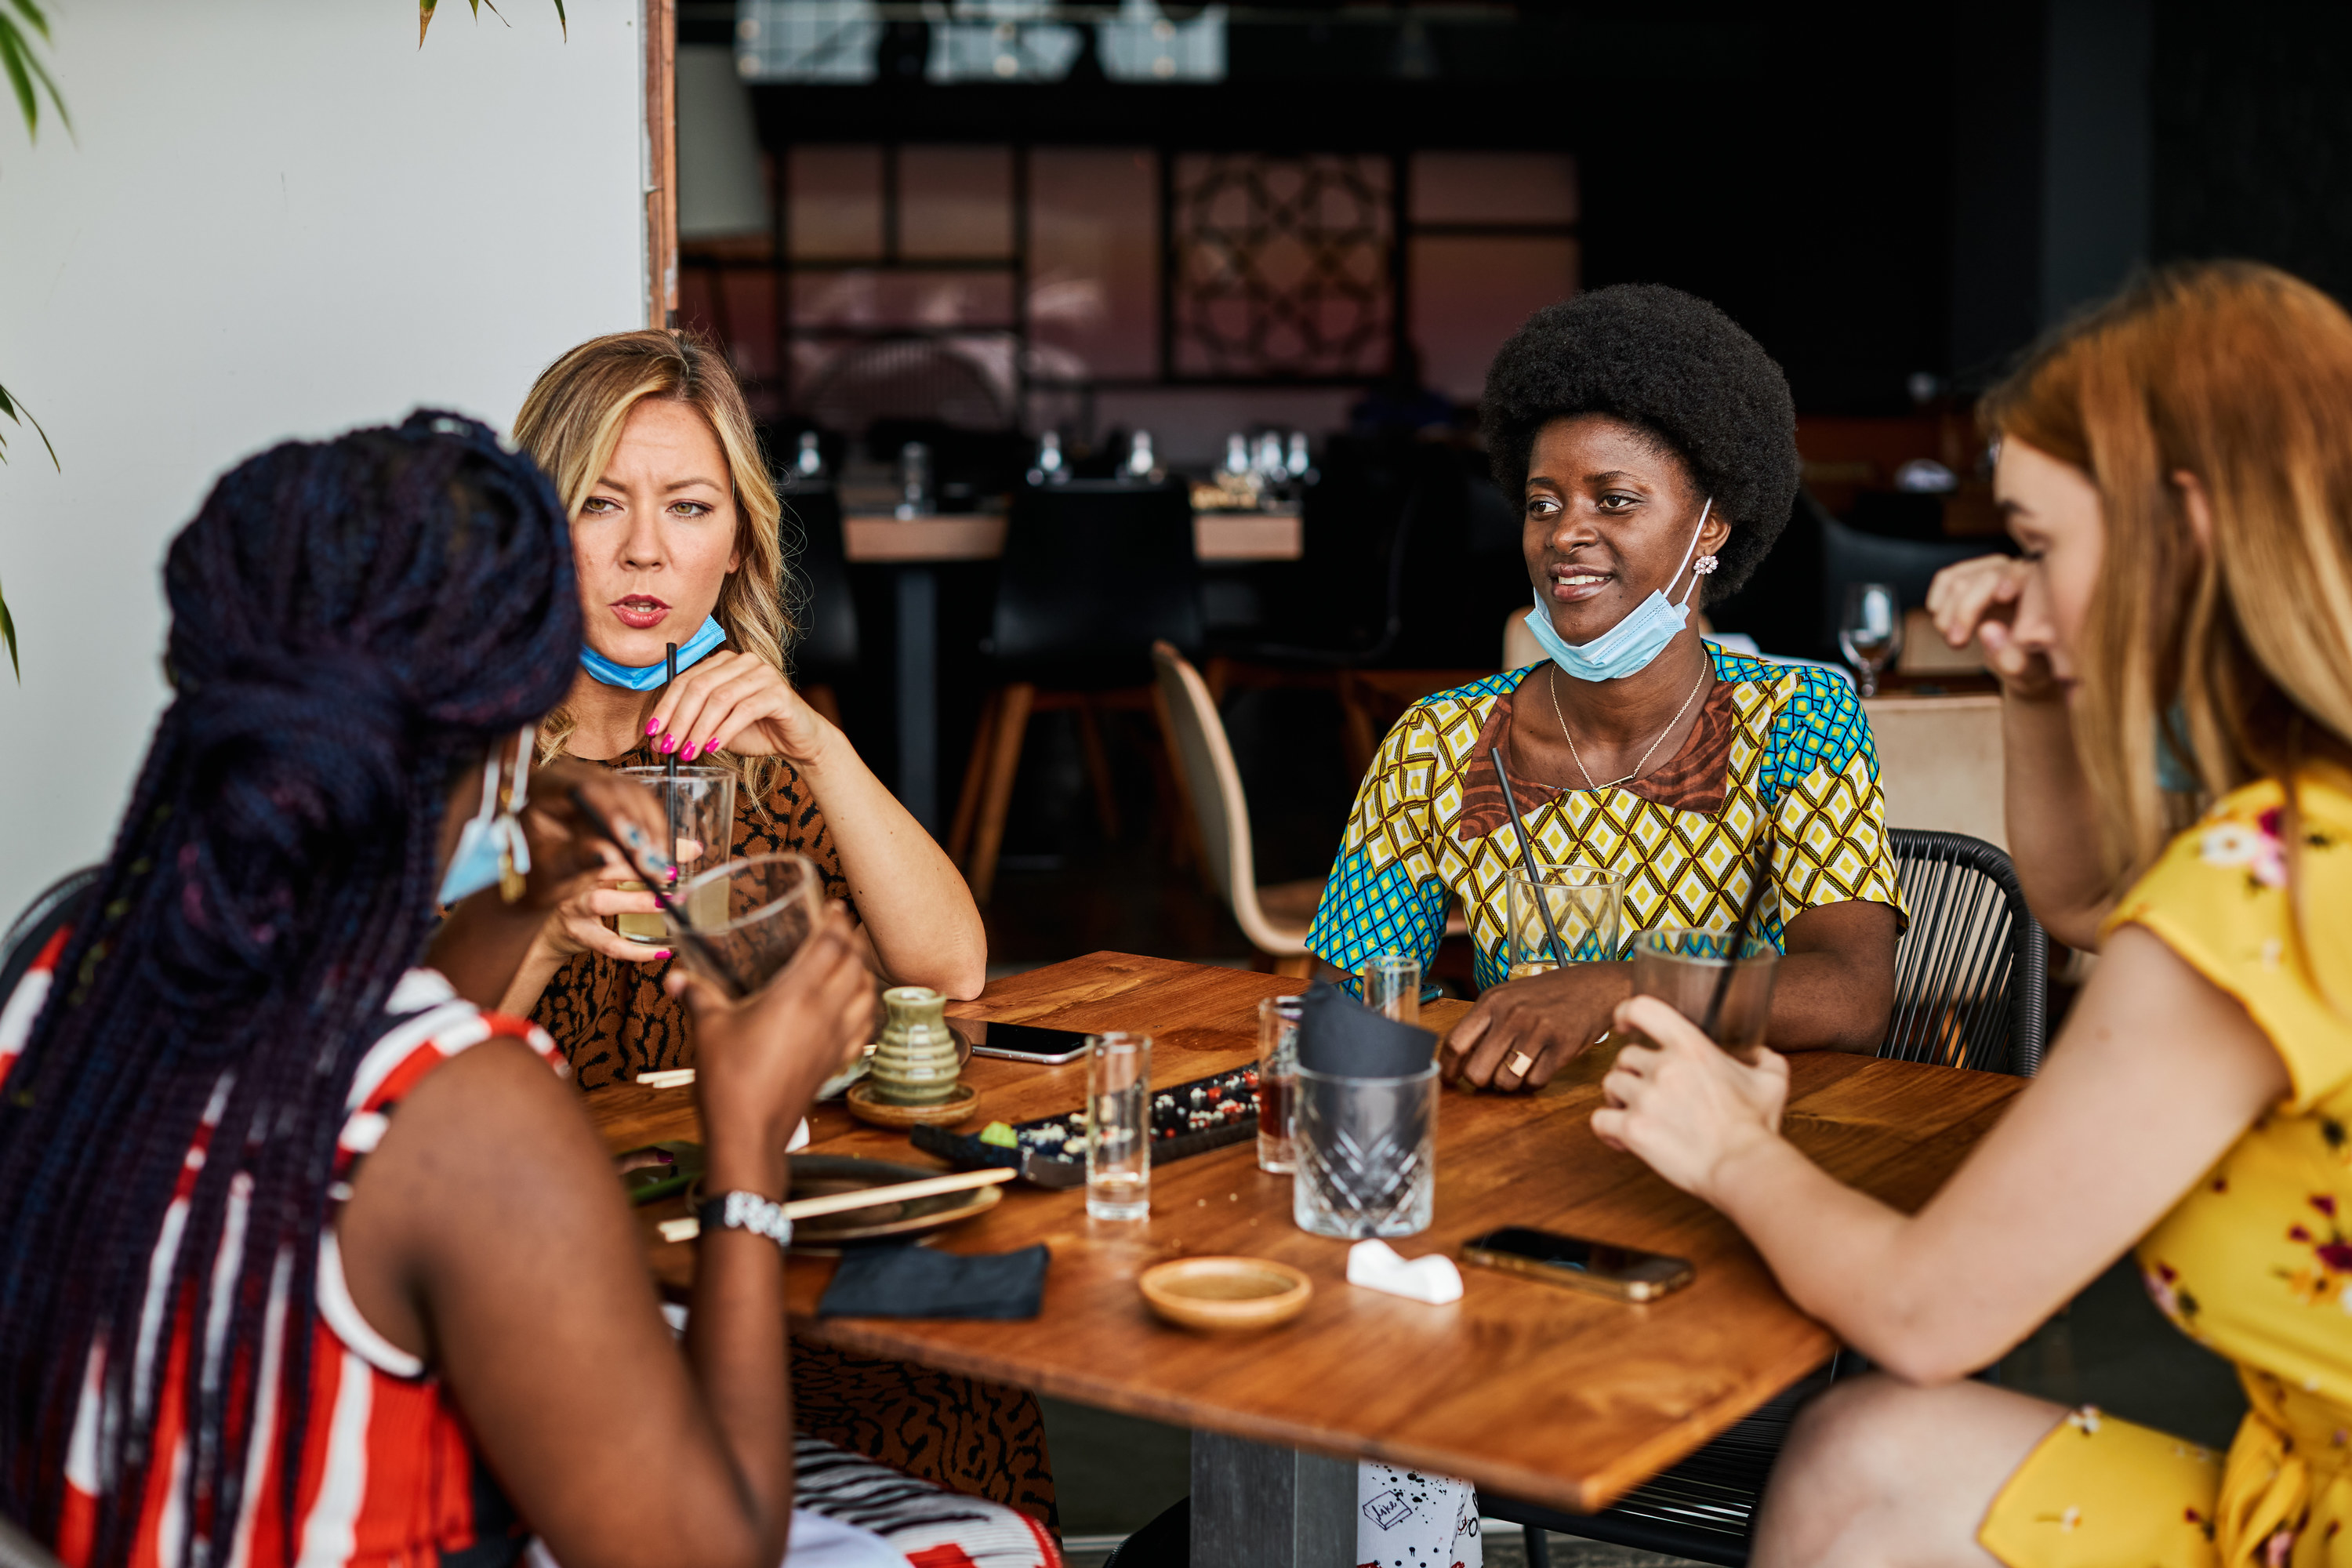 Group of millennial women sitting at a restaurant table